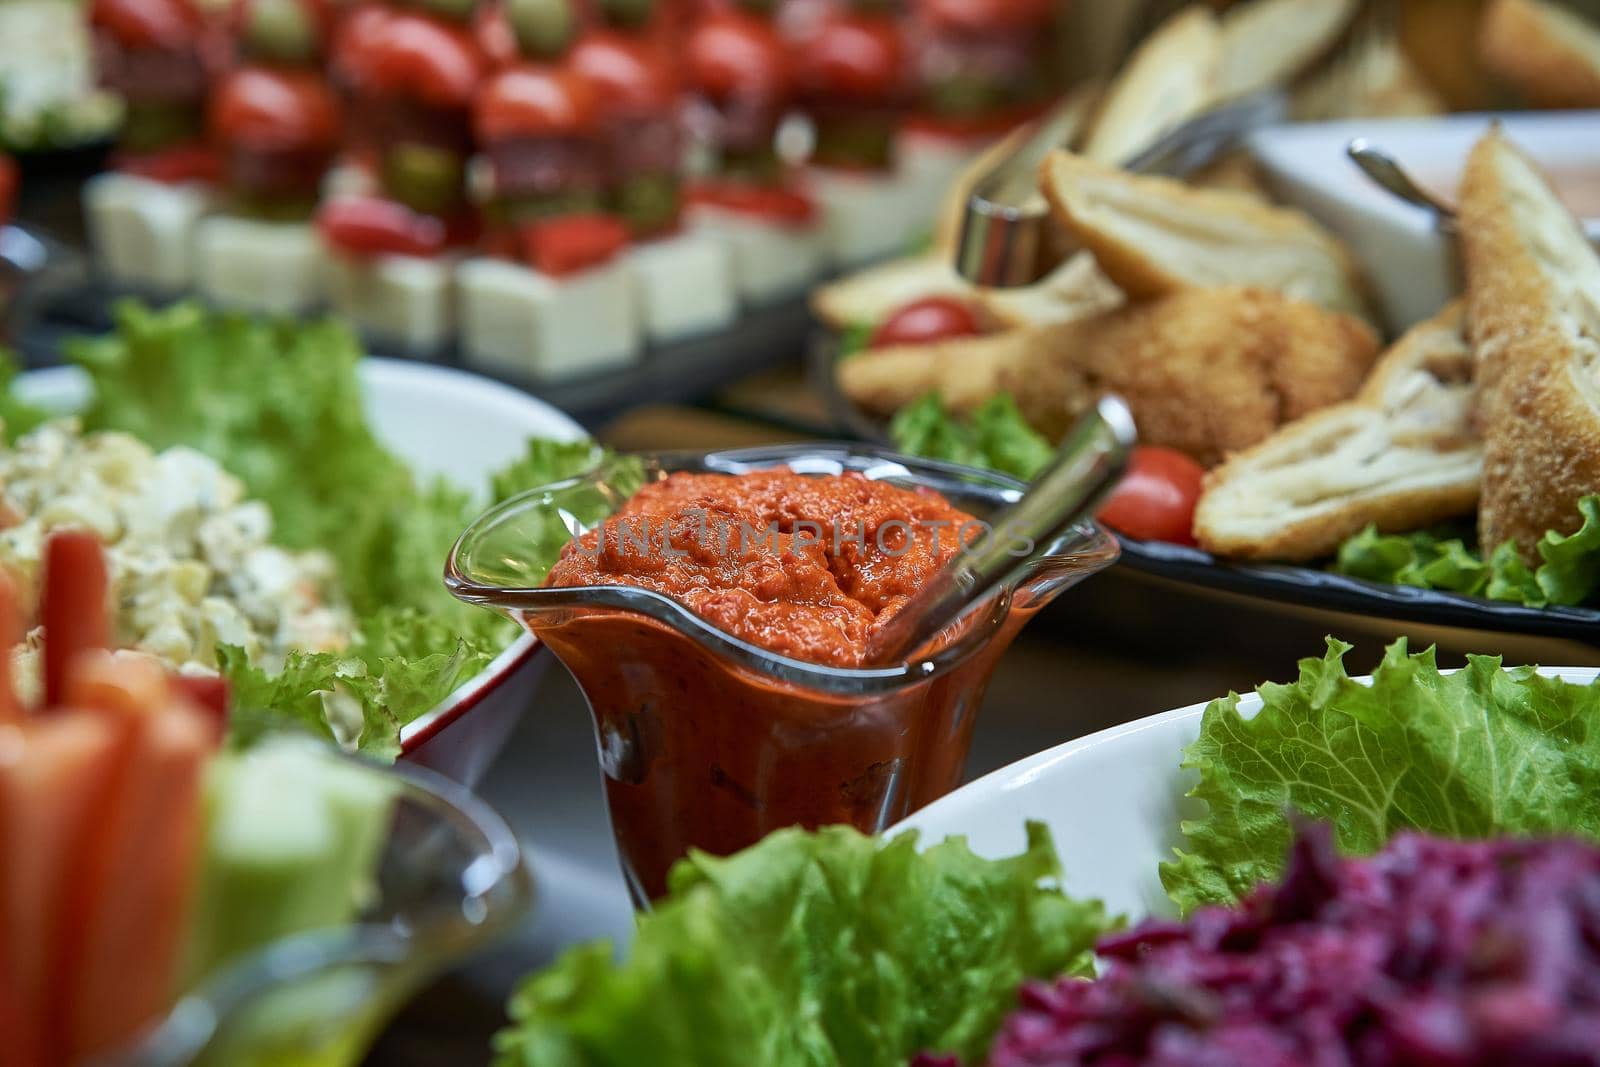 Aivar sauce in the background with another meal on the table closeup